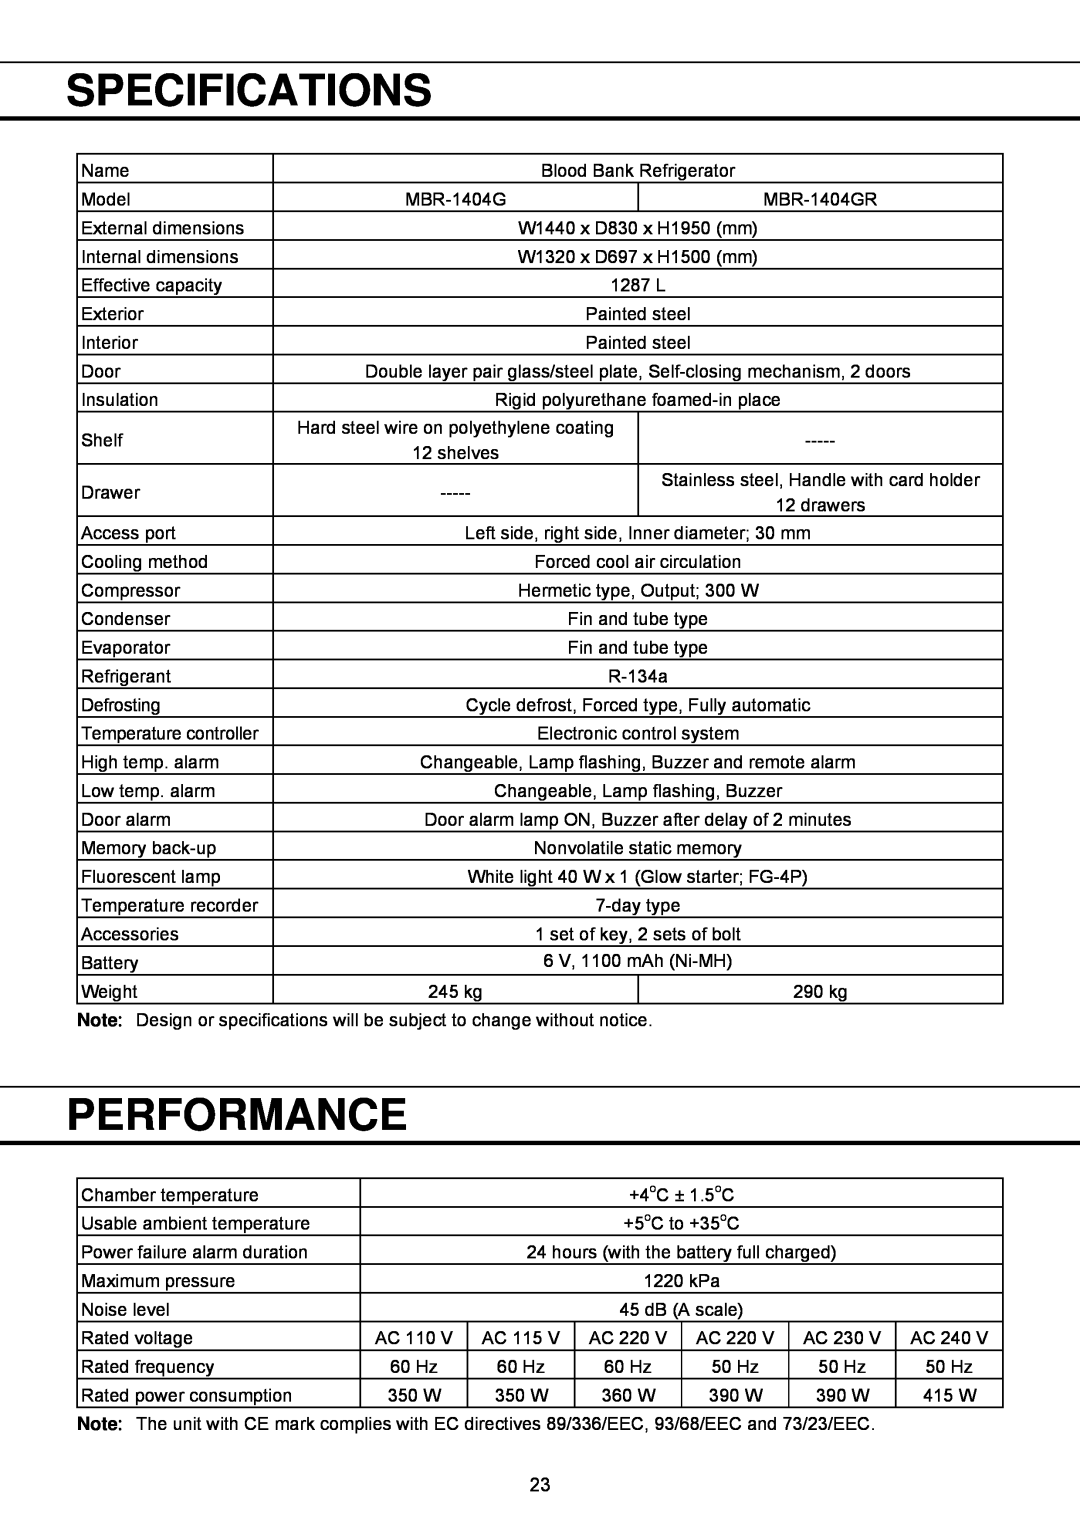 Sanyo MBR-1404GR instruction manual Specifications, Performance 